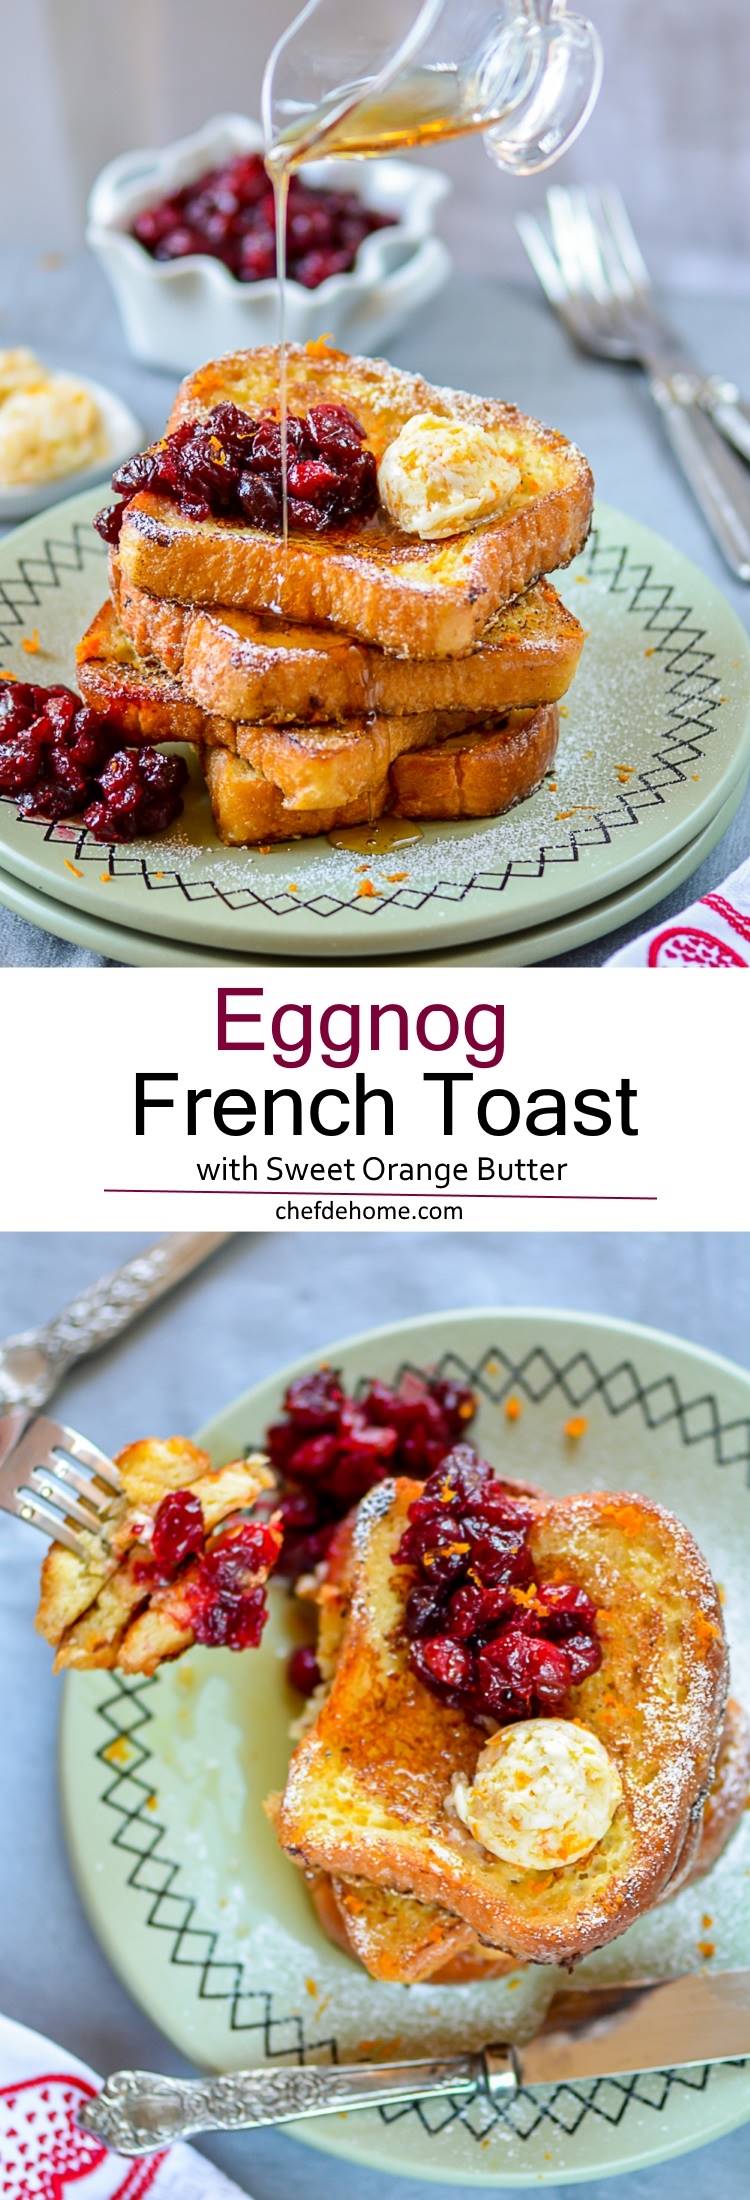 Eggnog French Toast for Sunday Brunch | chefdehome.com